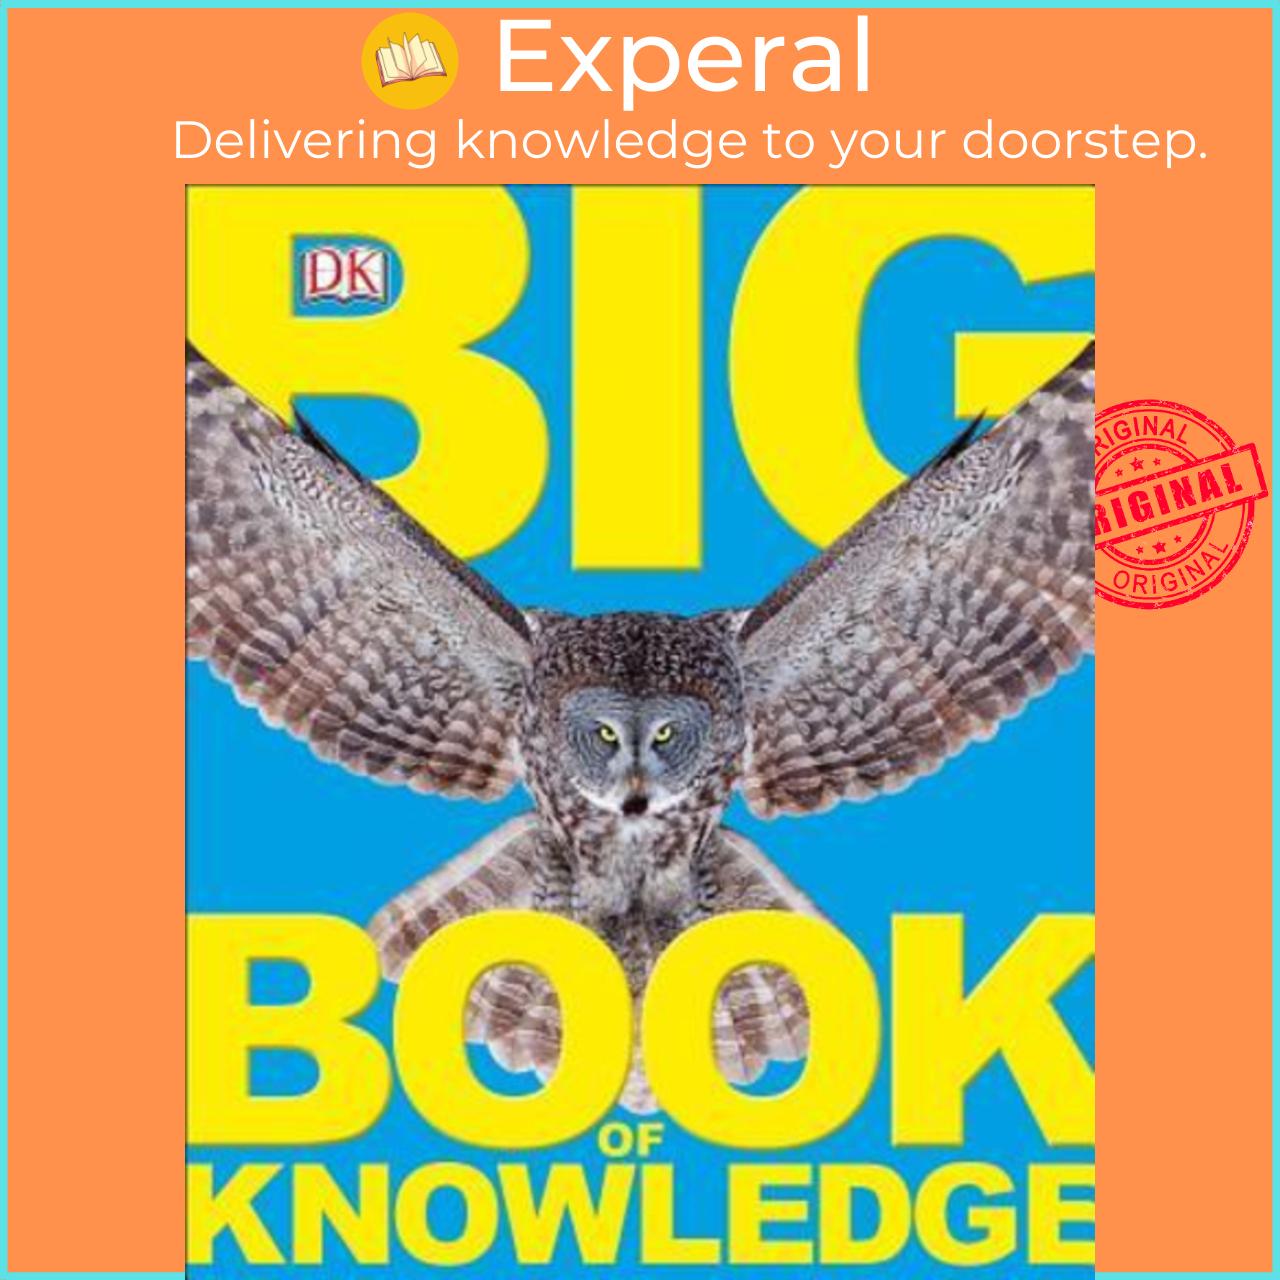 Sách - Big Book of Knowledge by DK (US edition, paperback)